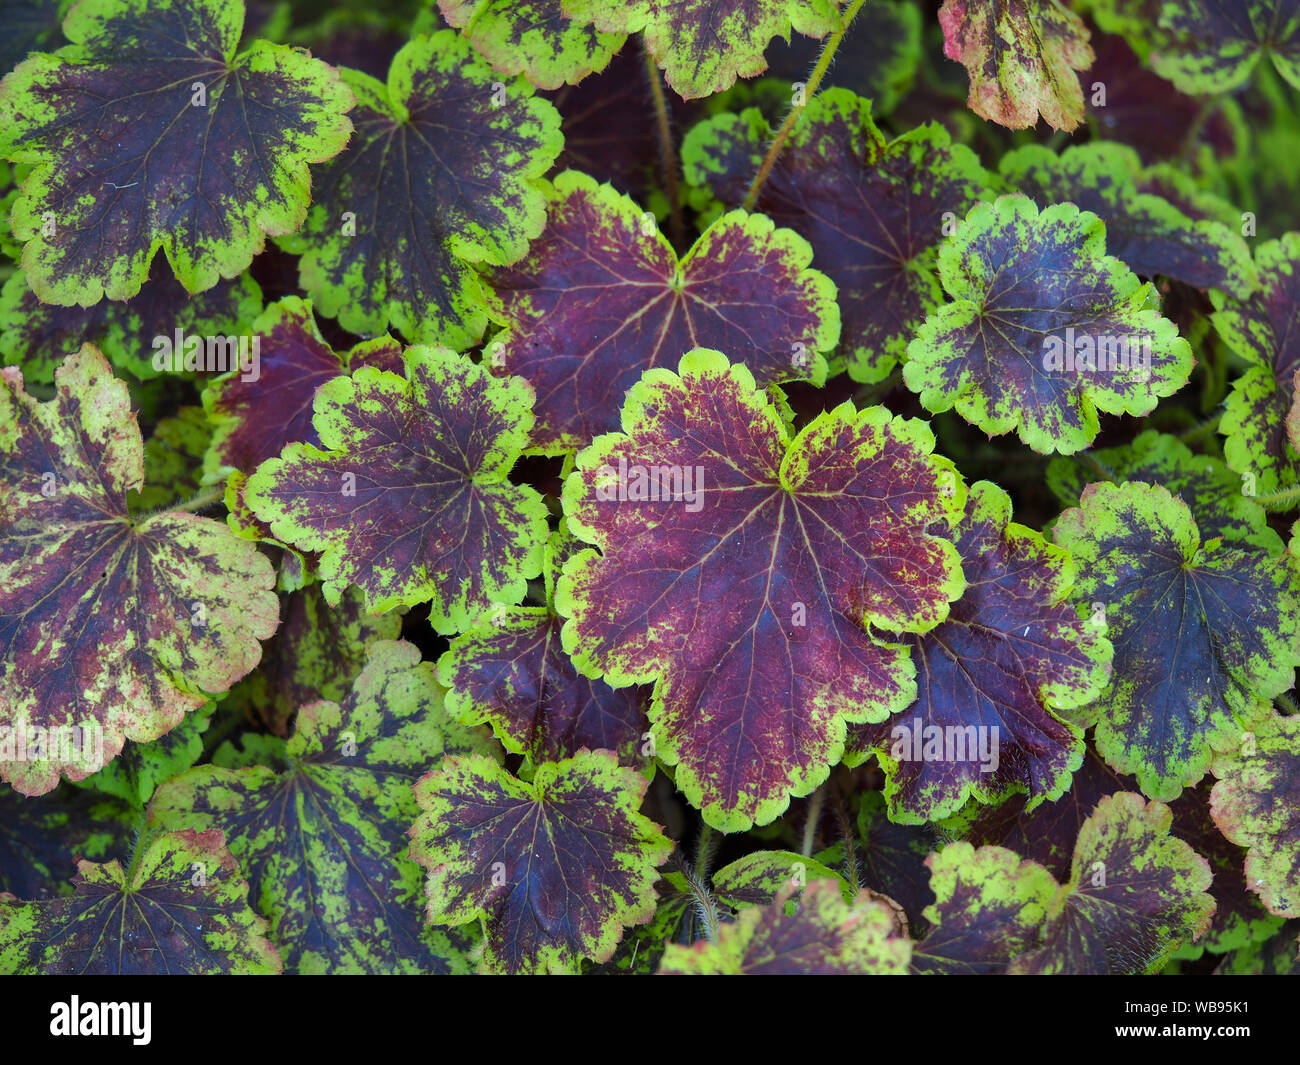 Closeup of the strikingly colourful variegated leaves of a Heucherella plant in a garden Stock Photo